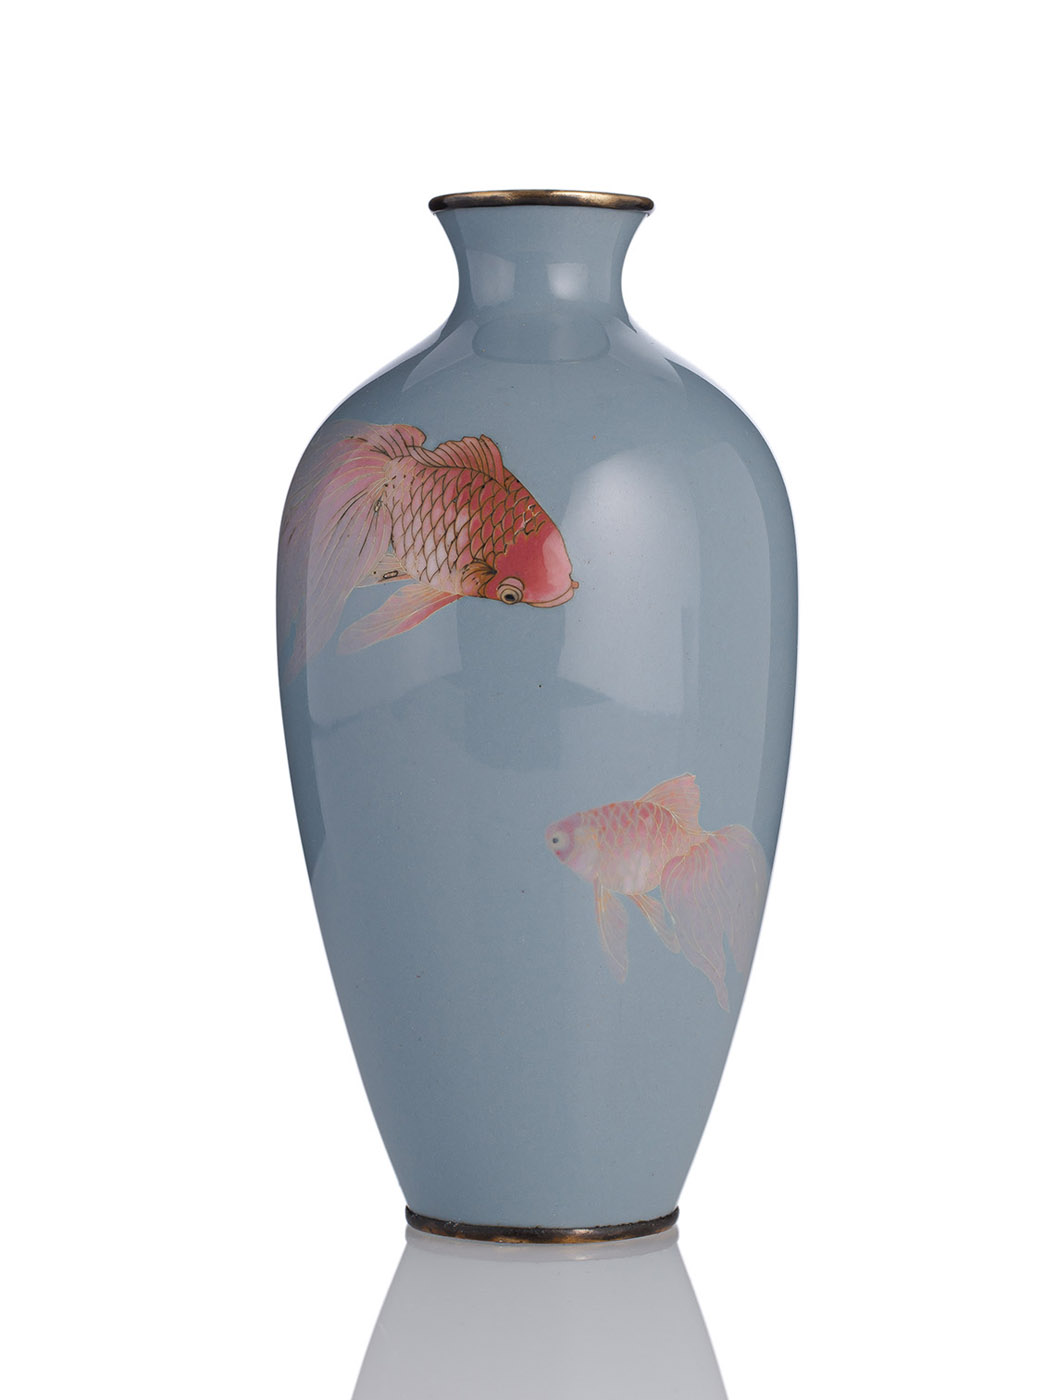 <b>A FINE CLOISONNÉ ENAMEL VASE WITH TWO GOLD FISHES</b>